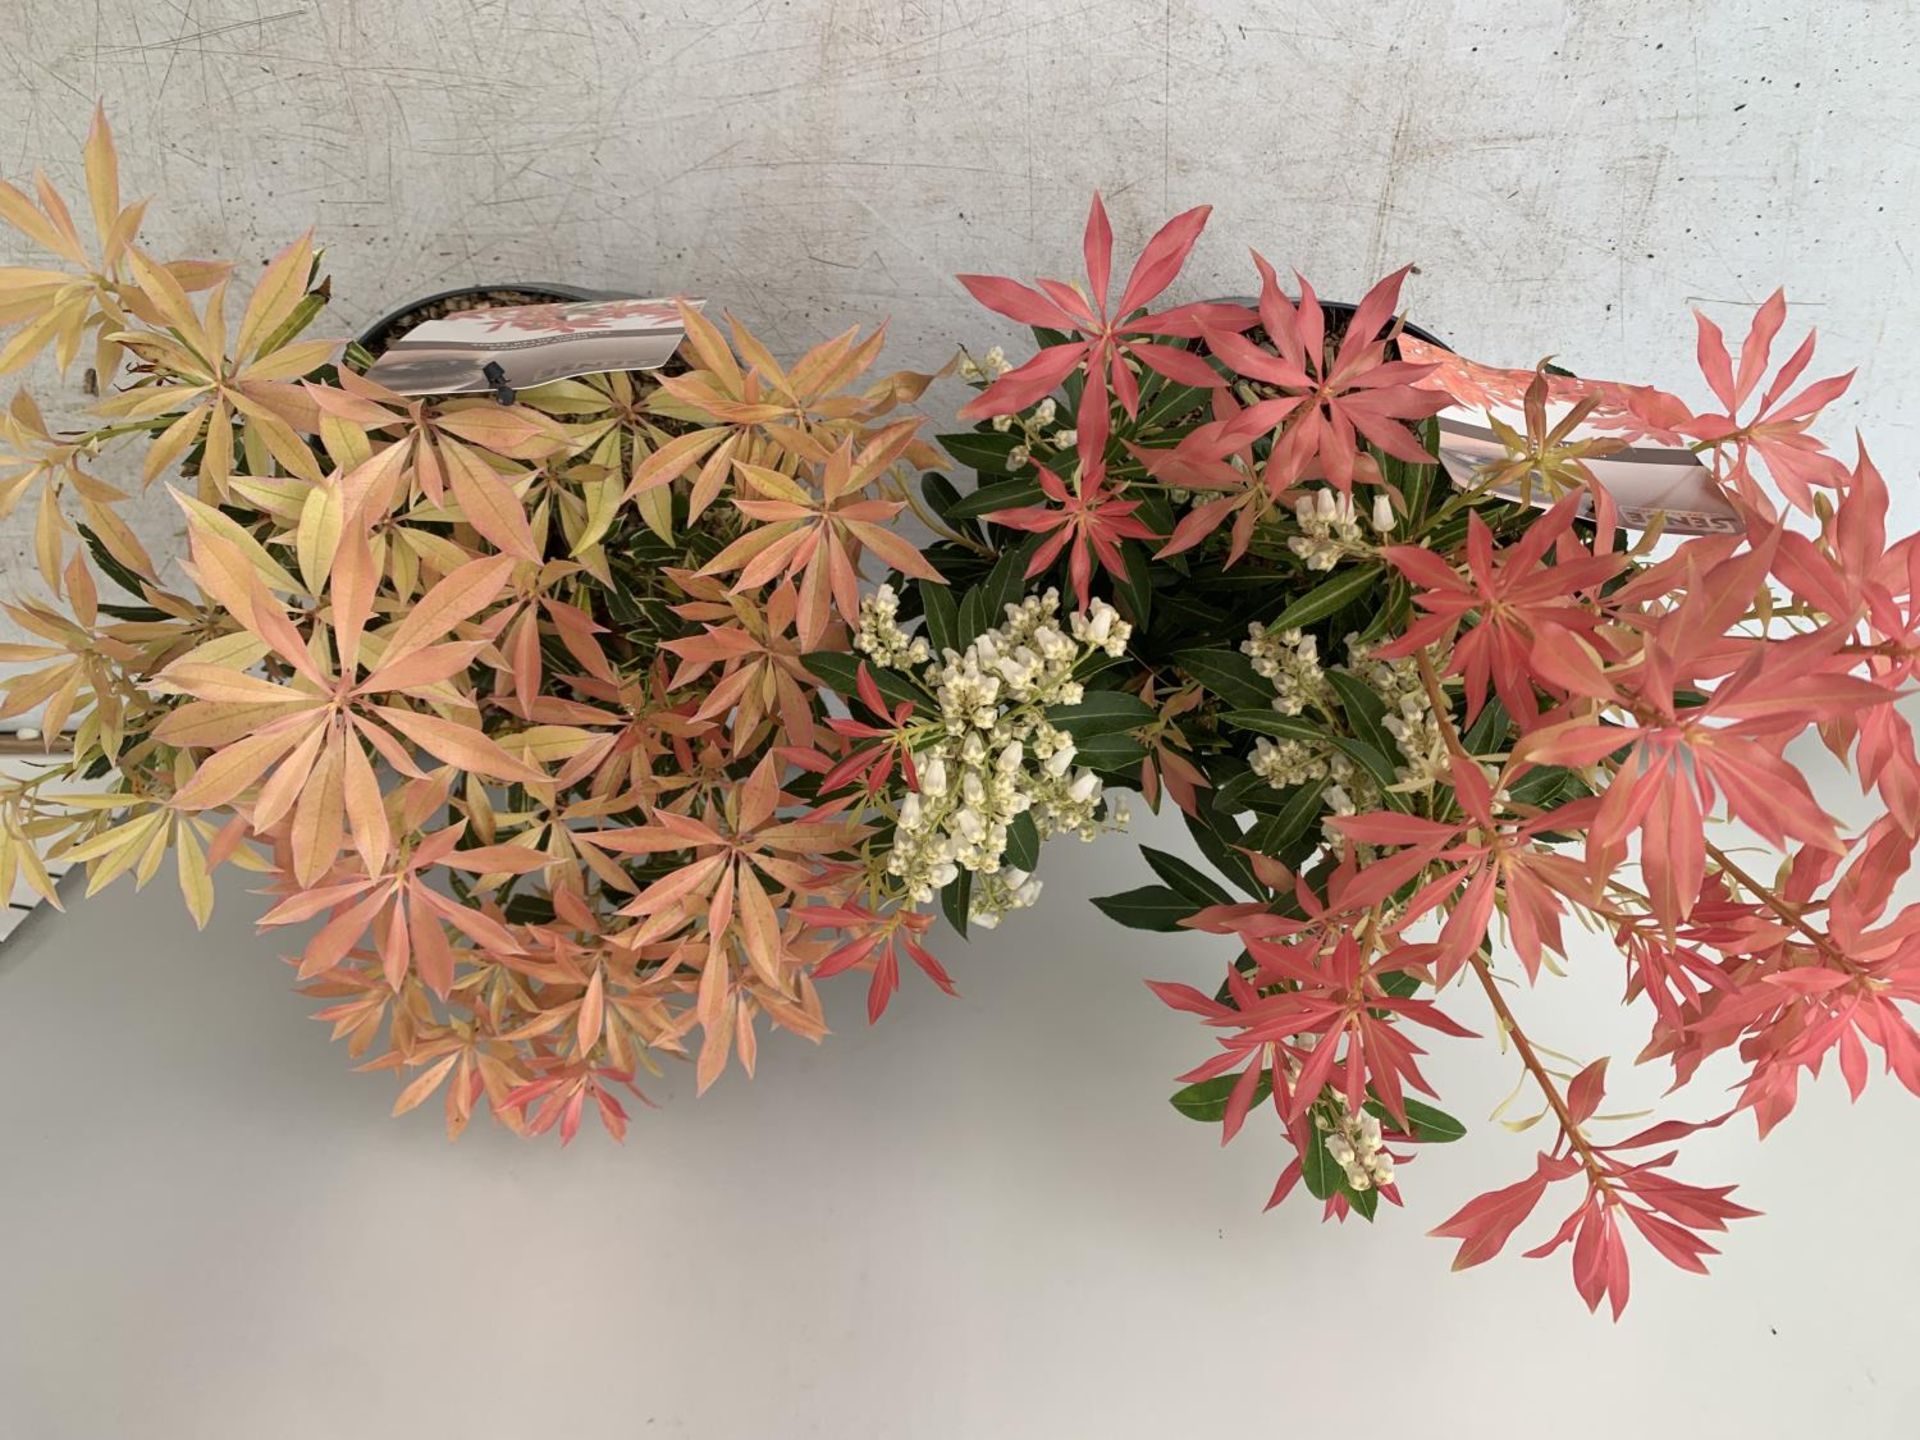 TWO PIERIS JAPONICA 'FLAMING SILVER' AND 'FOREST FLAME' IN 3 LTR POTS 45CM TALL PLUS VAT TO BE - Image 3 of 6